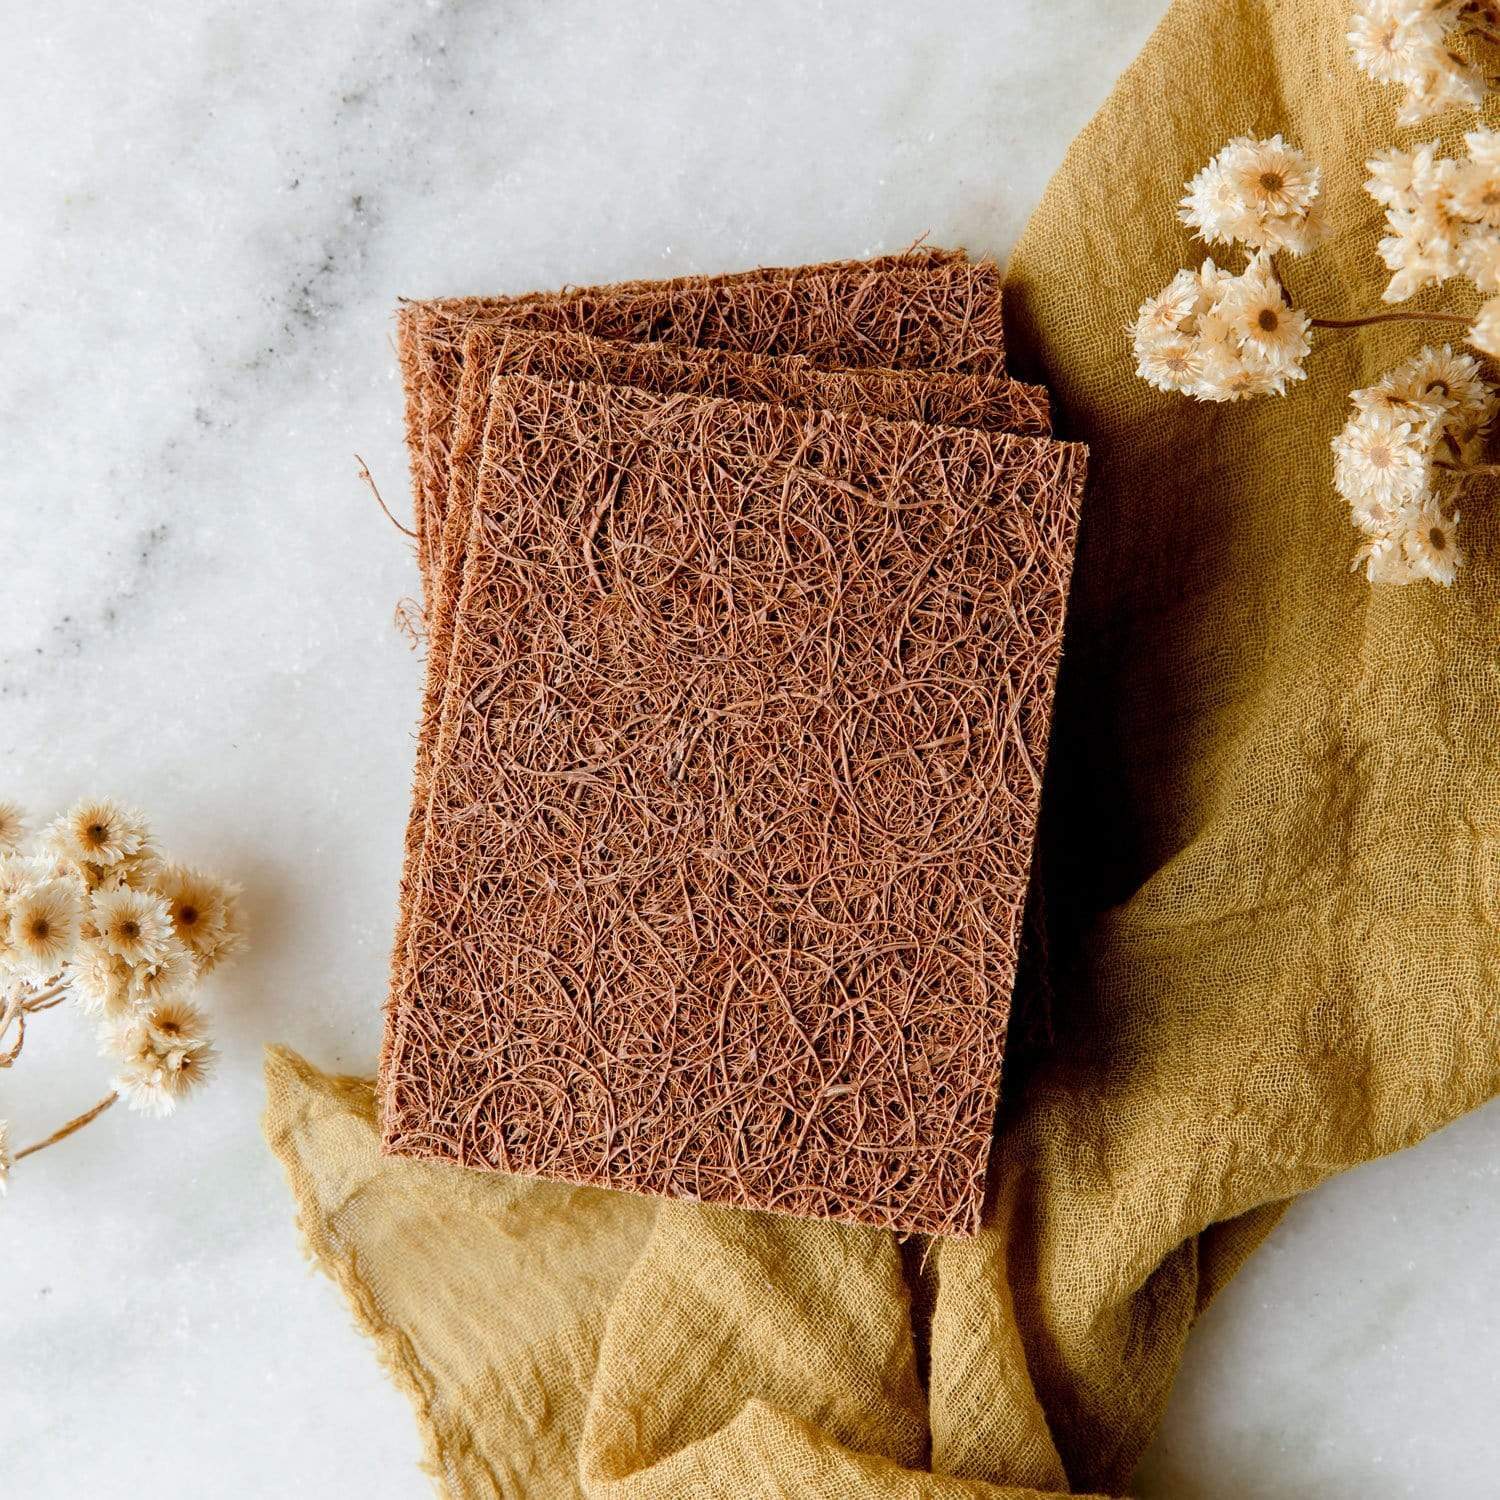 brown scrubby sponges made from coconut coir waste. Sitting on cloth on countertop